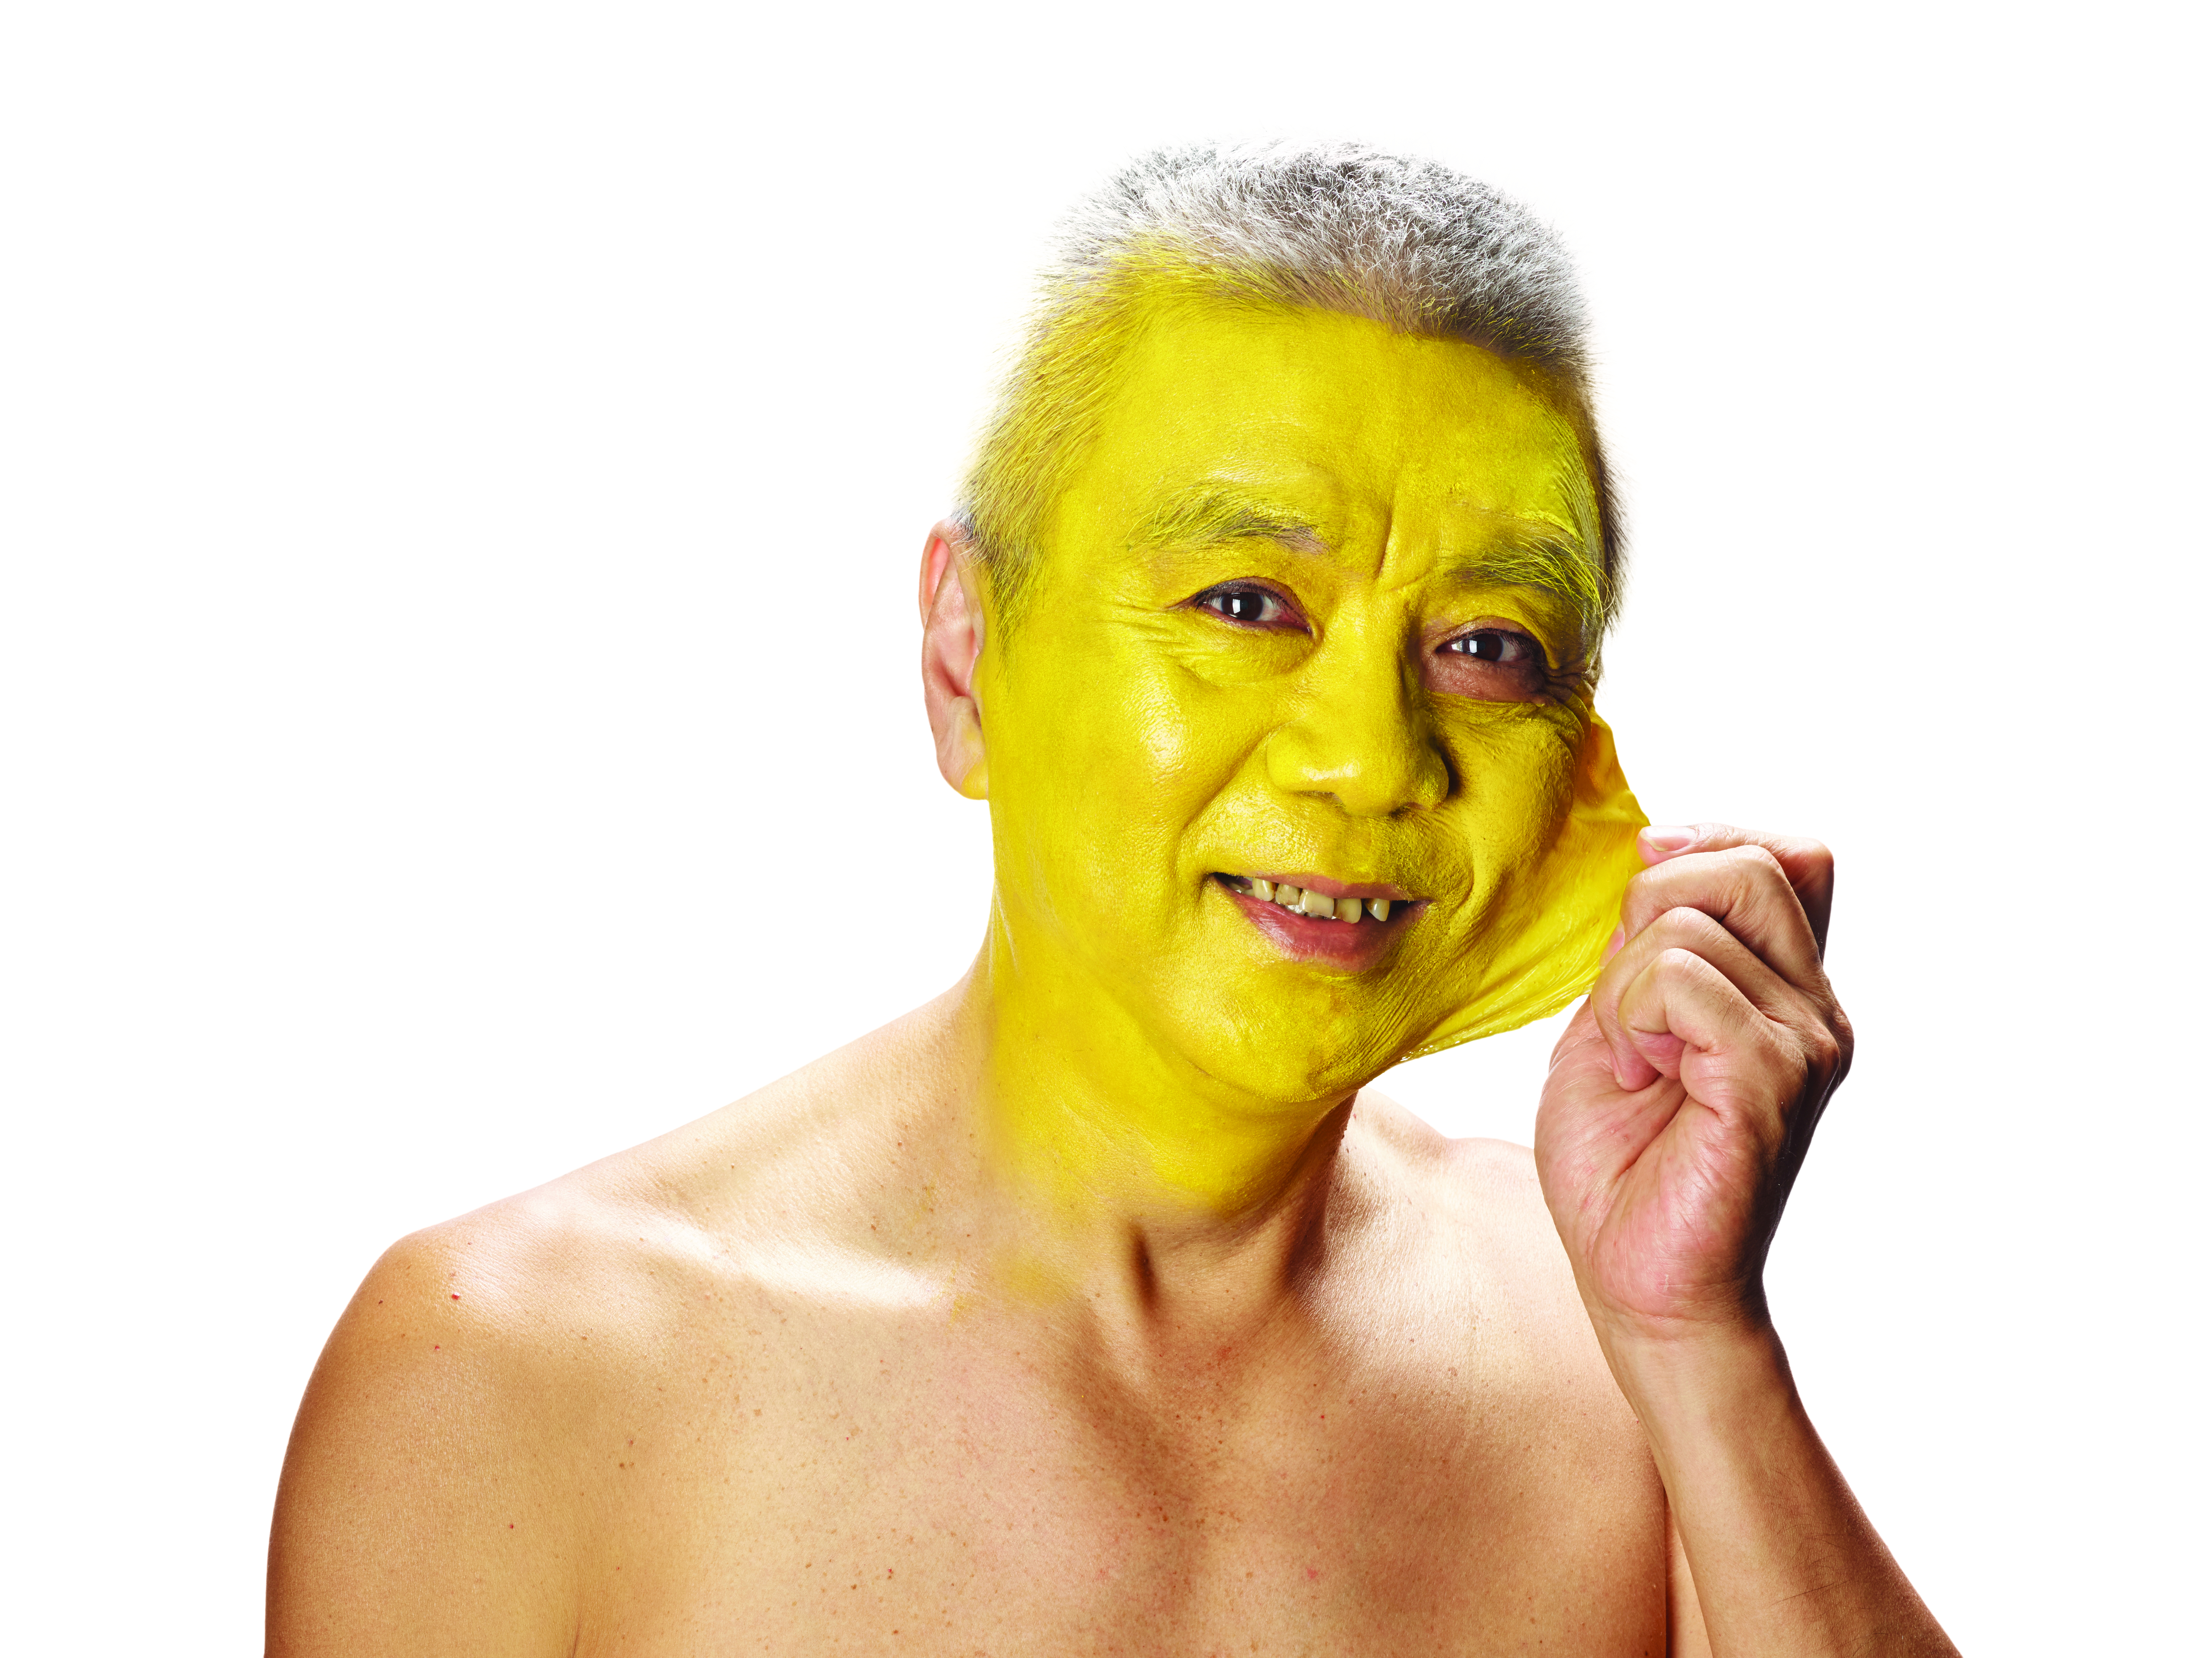 Yellow Face Poking fun at tense and racially charged situations is what Tony Award-winning playwright David Henry Hwang is good at doing. In Yellow Face, which debuted in Los Angeles in 2007 and brought to the stage in Hong Kong by Pants Theatre Production, HwangÕs semi-autobiographical lead and playwright unknowingly casts a white actor to play an Asian, and spends the rest of the story trying to cover up and later atone for his errors. [07JANUARY2016 BOOK NOW]